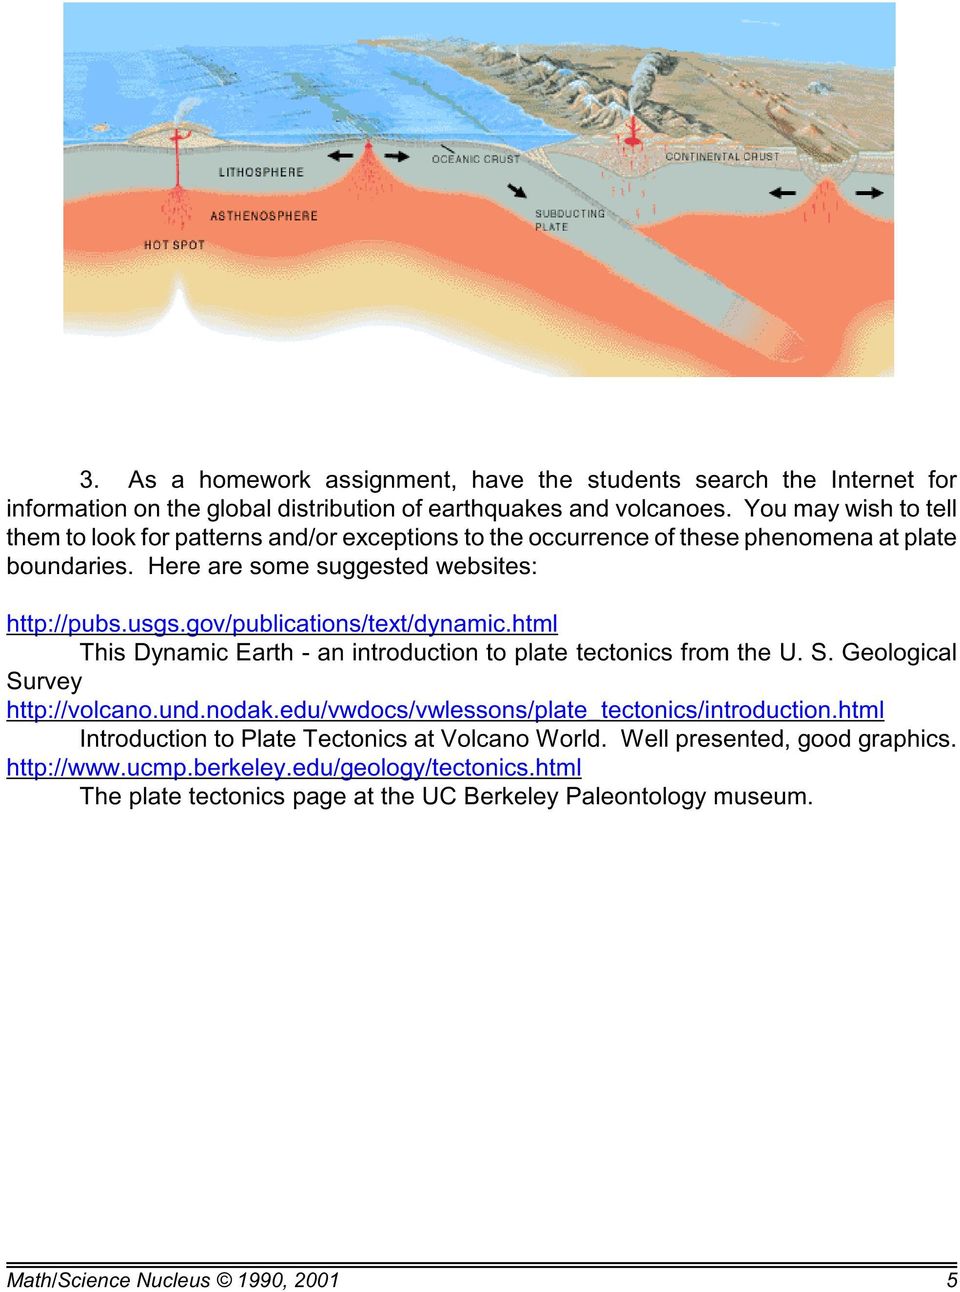 gov/publications/text/dynamic.html This Dynamic Earth - an introduction to plate tectonics from the U. S. Geological Survey http://volcano.und.nodak.